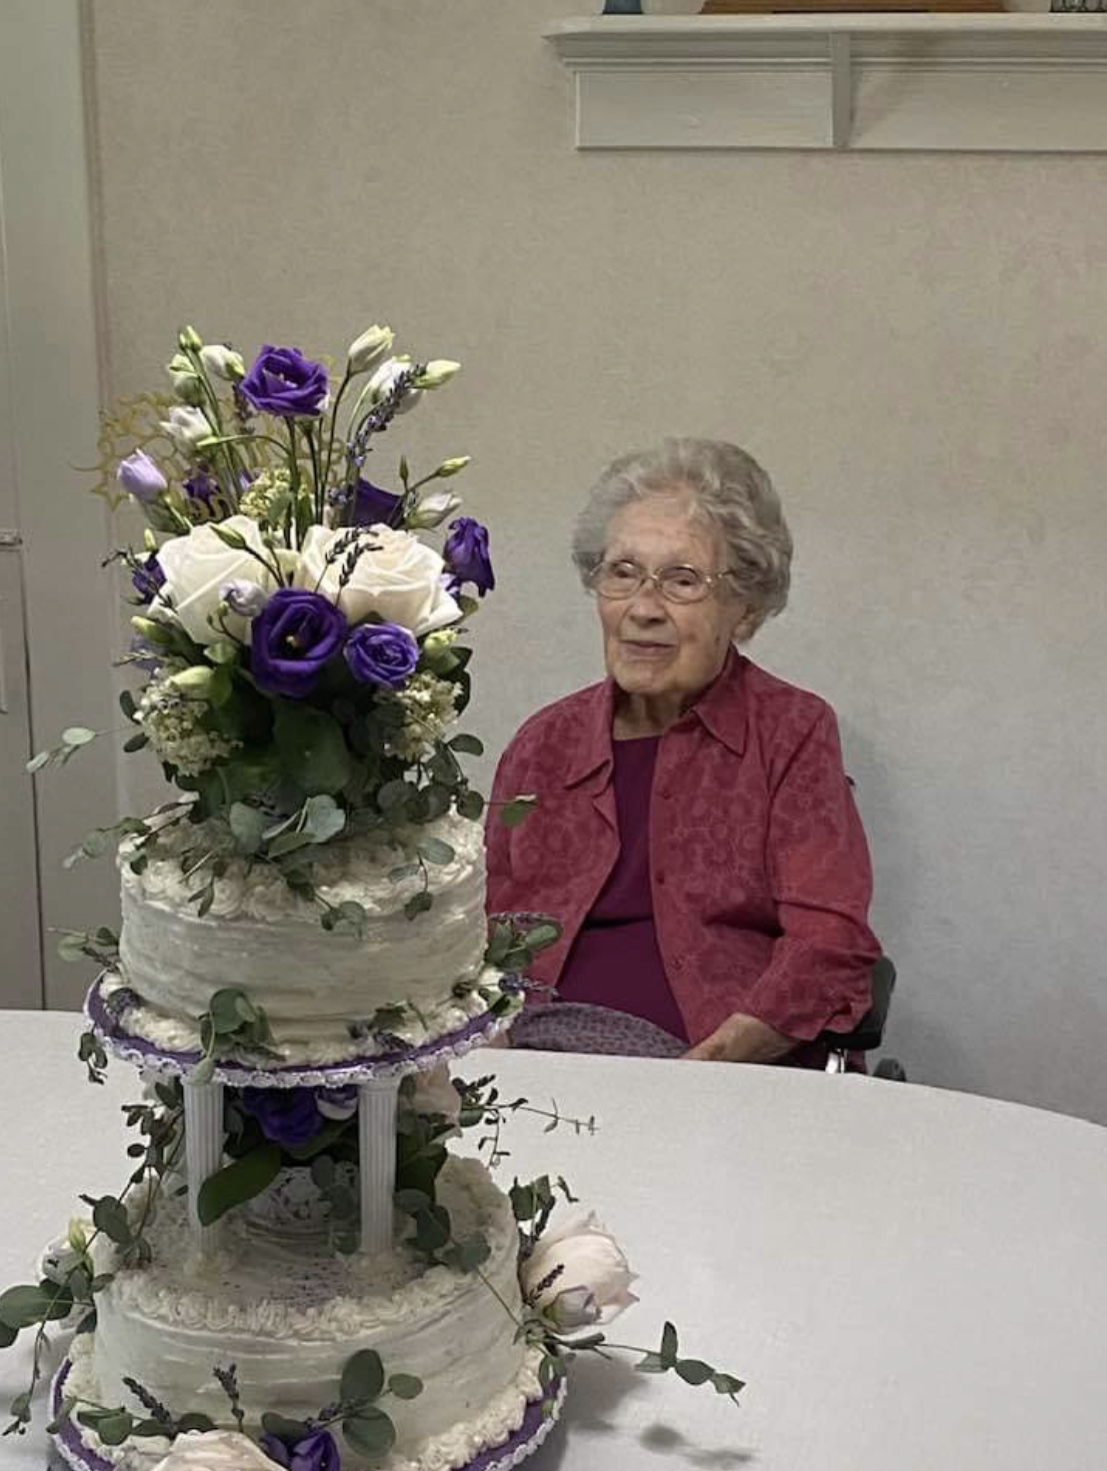 On her 113th birthday. (Source: Facebook)